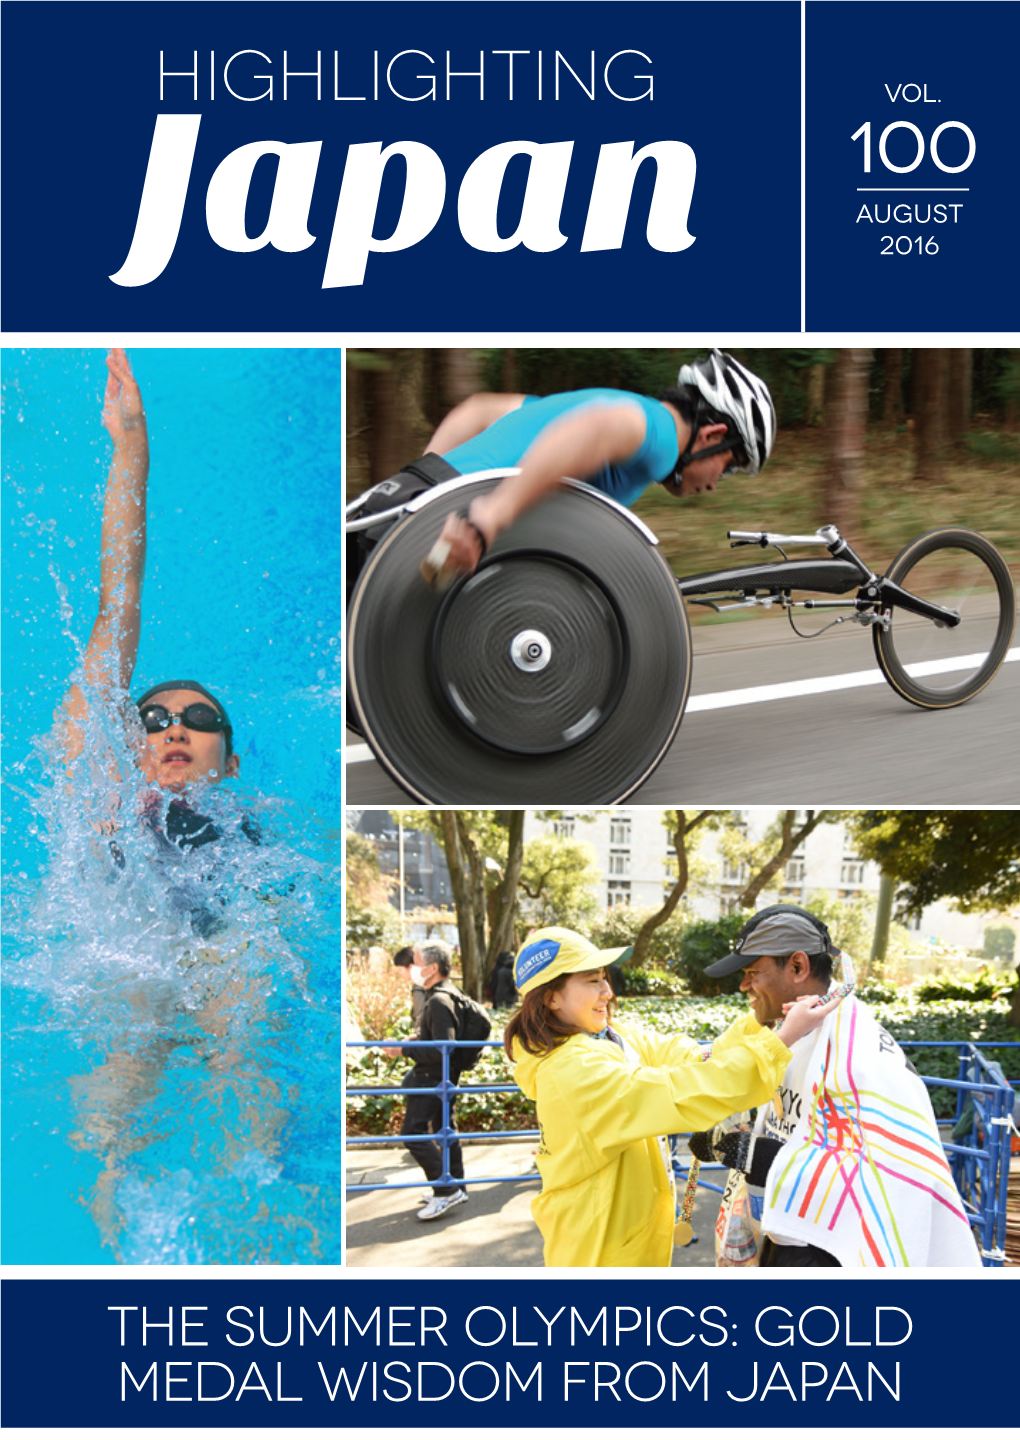 The Summer Olympics: Gold Medal Wisdom from Japan